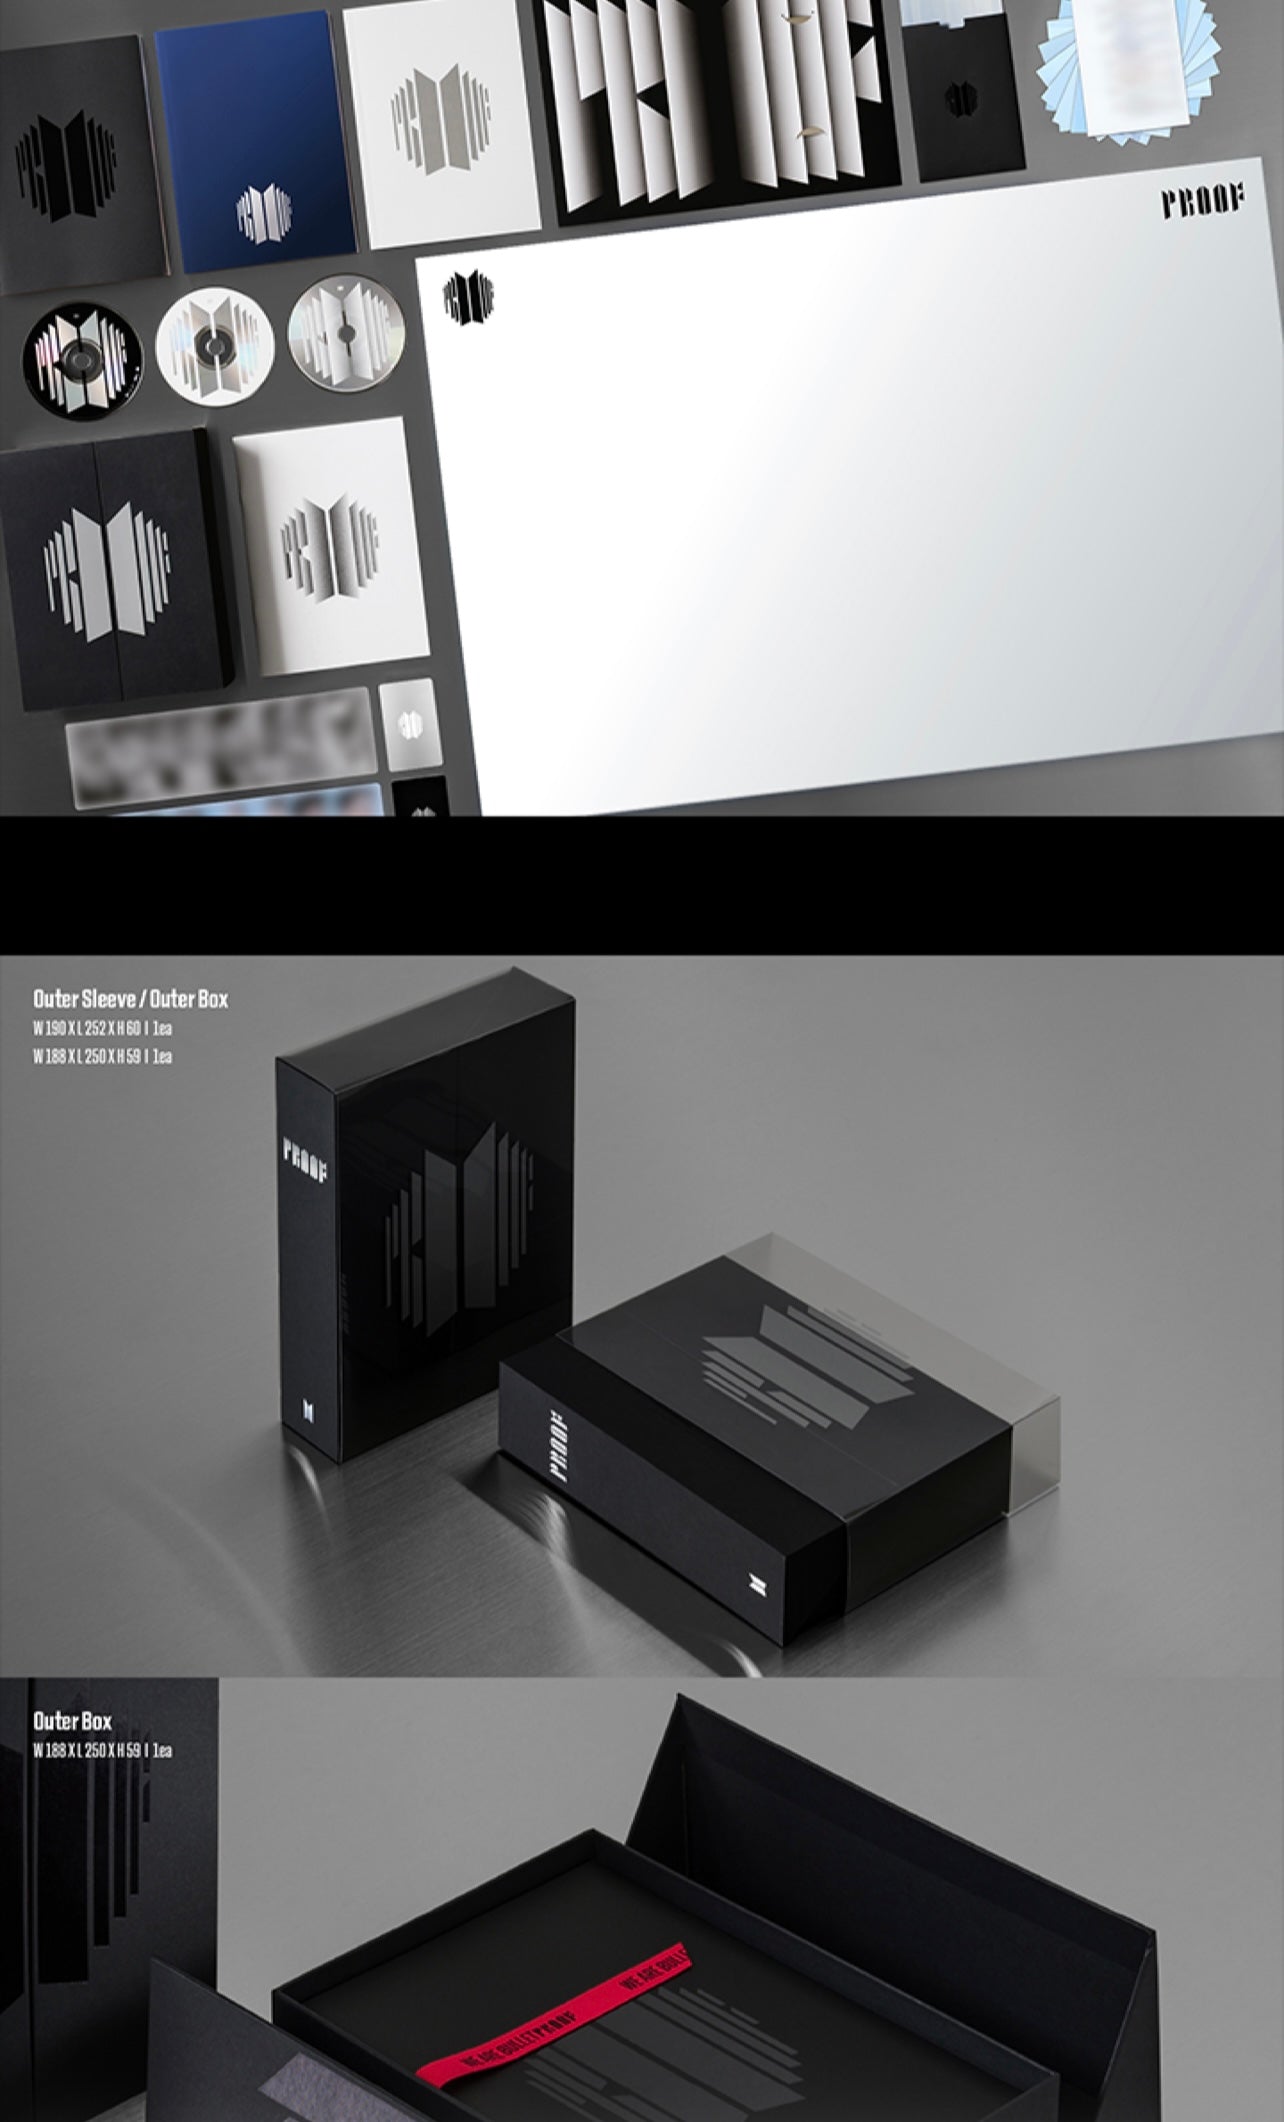 BTS Anthology Album - Proof (Standard Edition) WEVERSE Gift Included